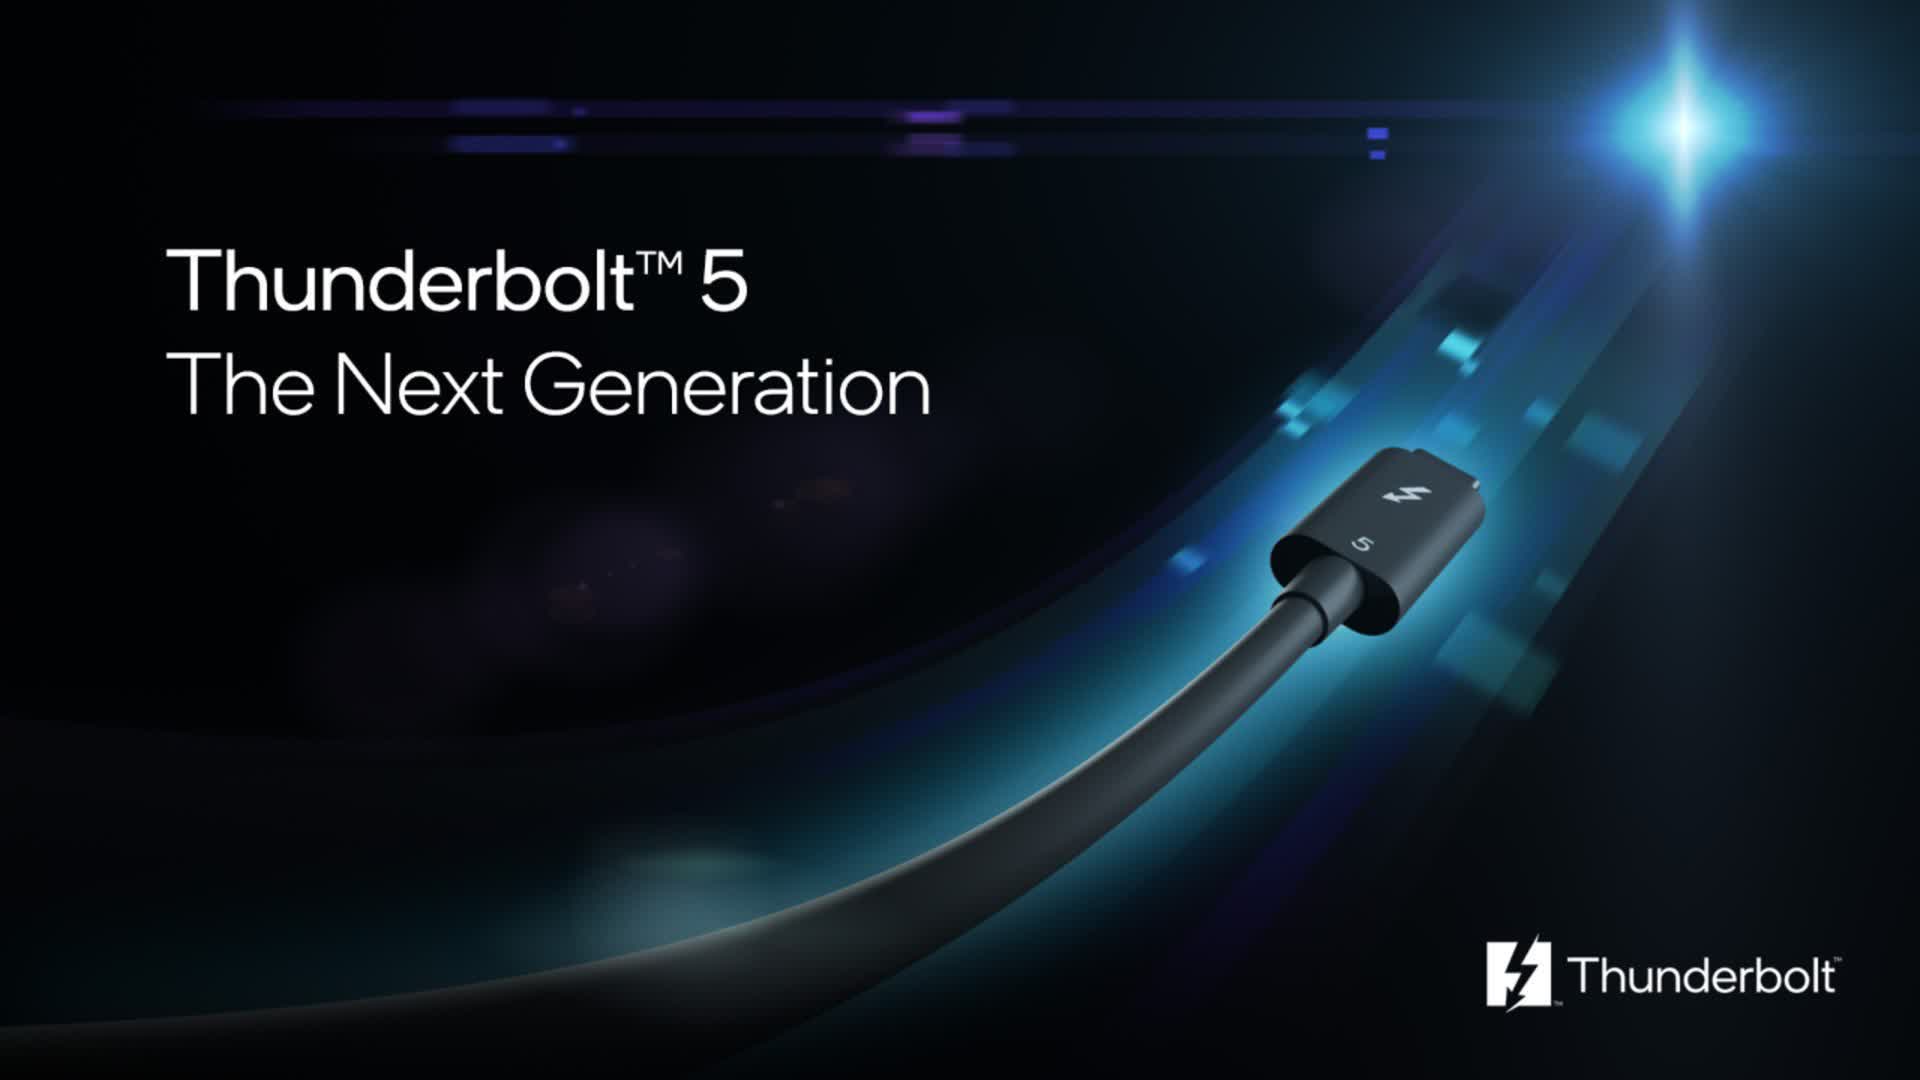 Thunderbolt 5 arrives next year with up to 120Gbps bandwidth